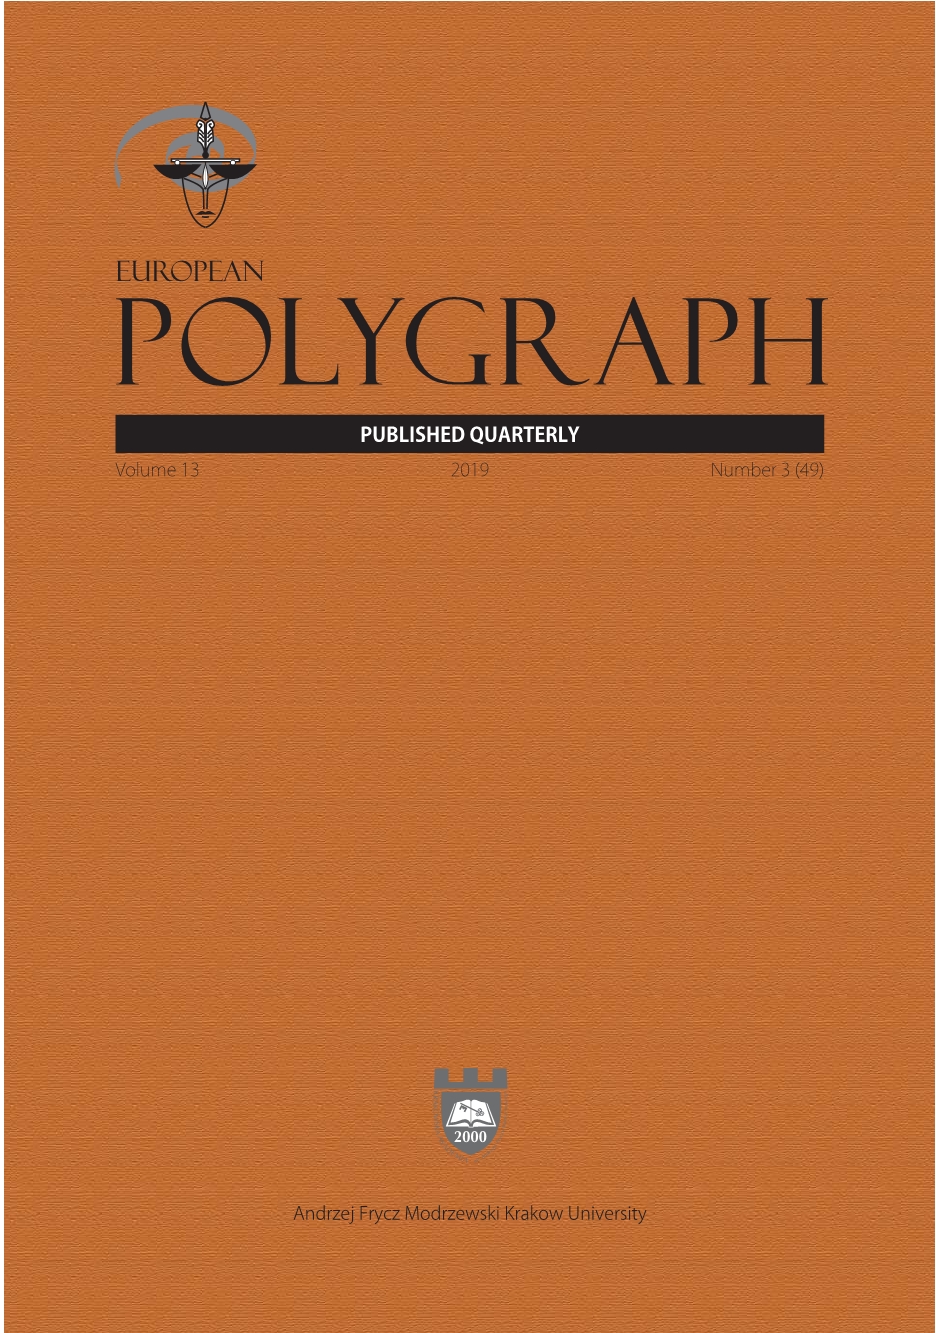 Report from the 54th Seminar of the American Polygraph Association